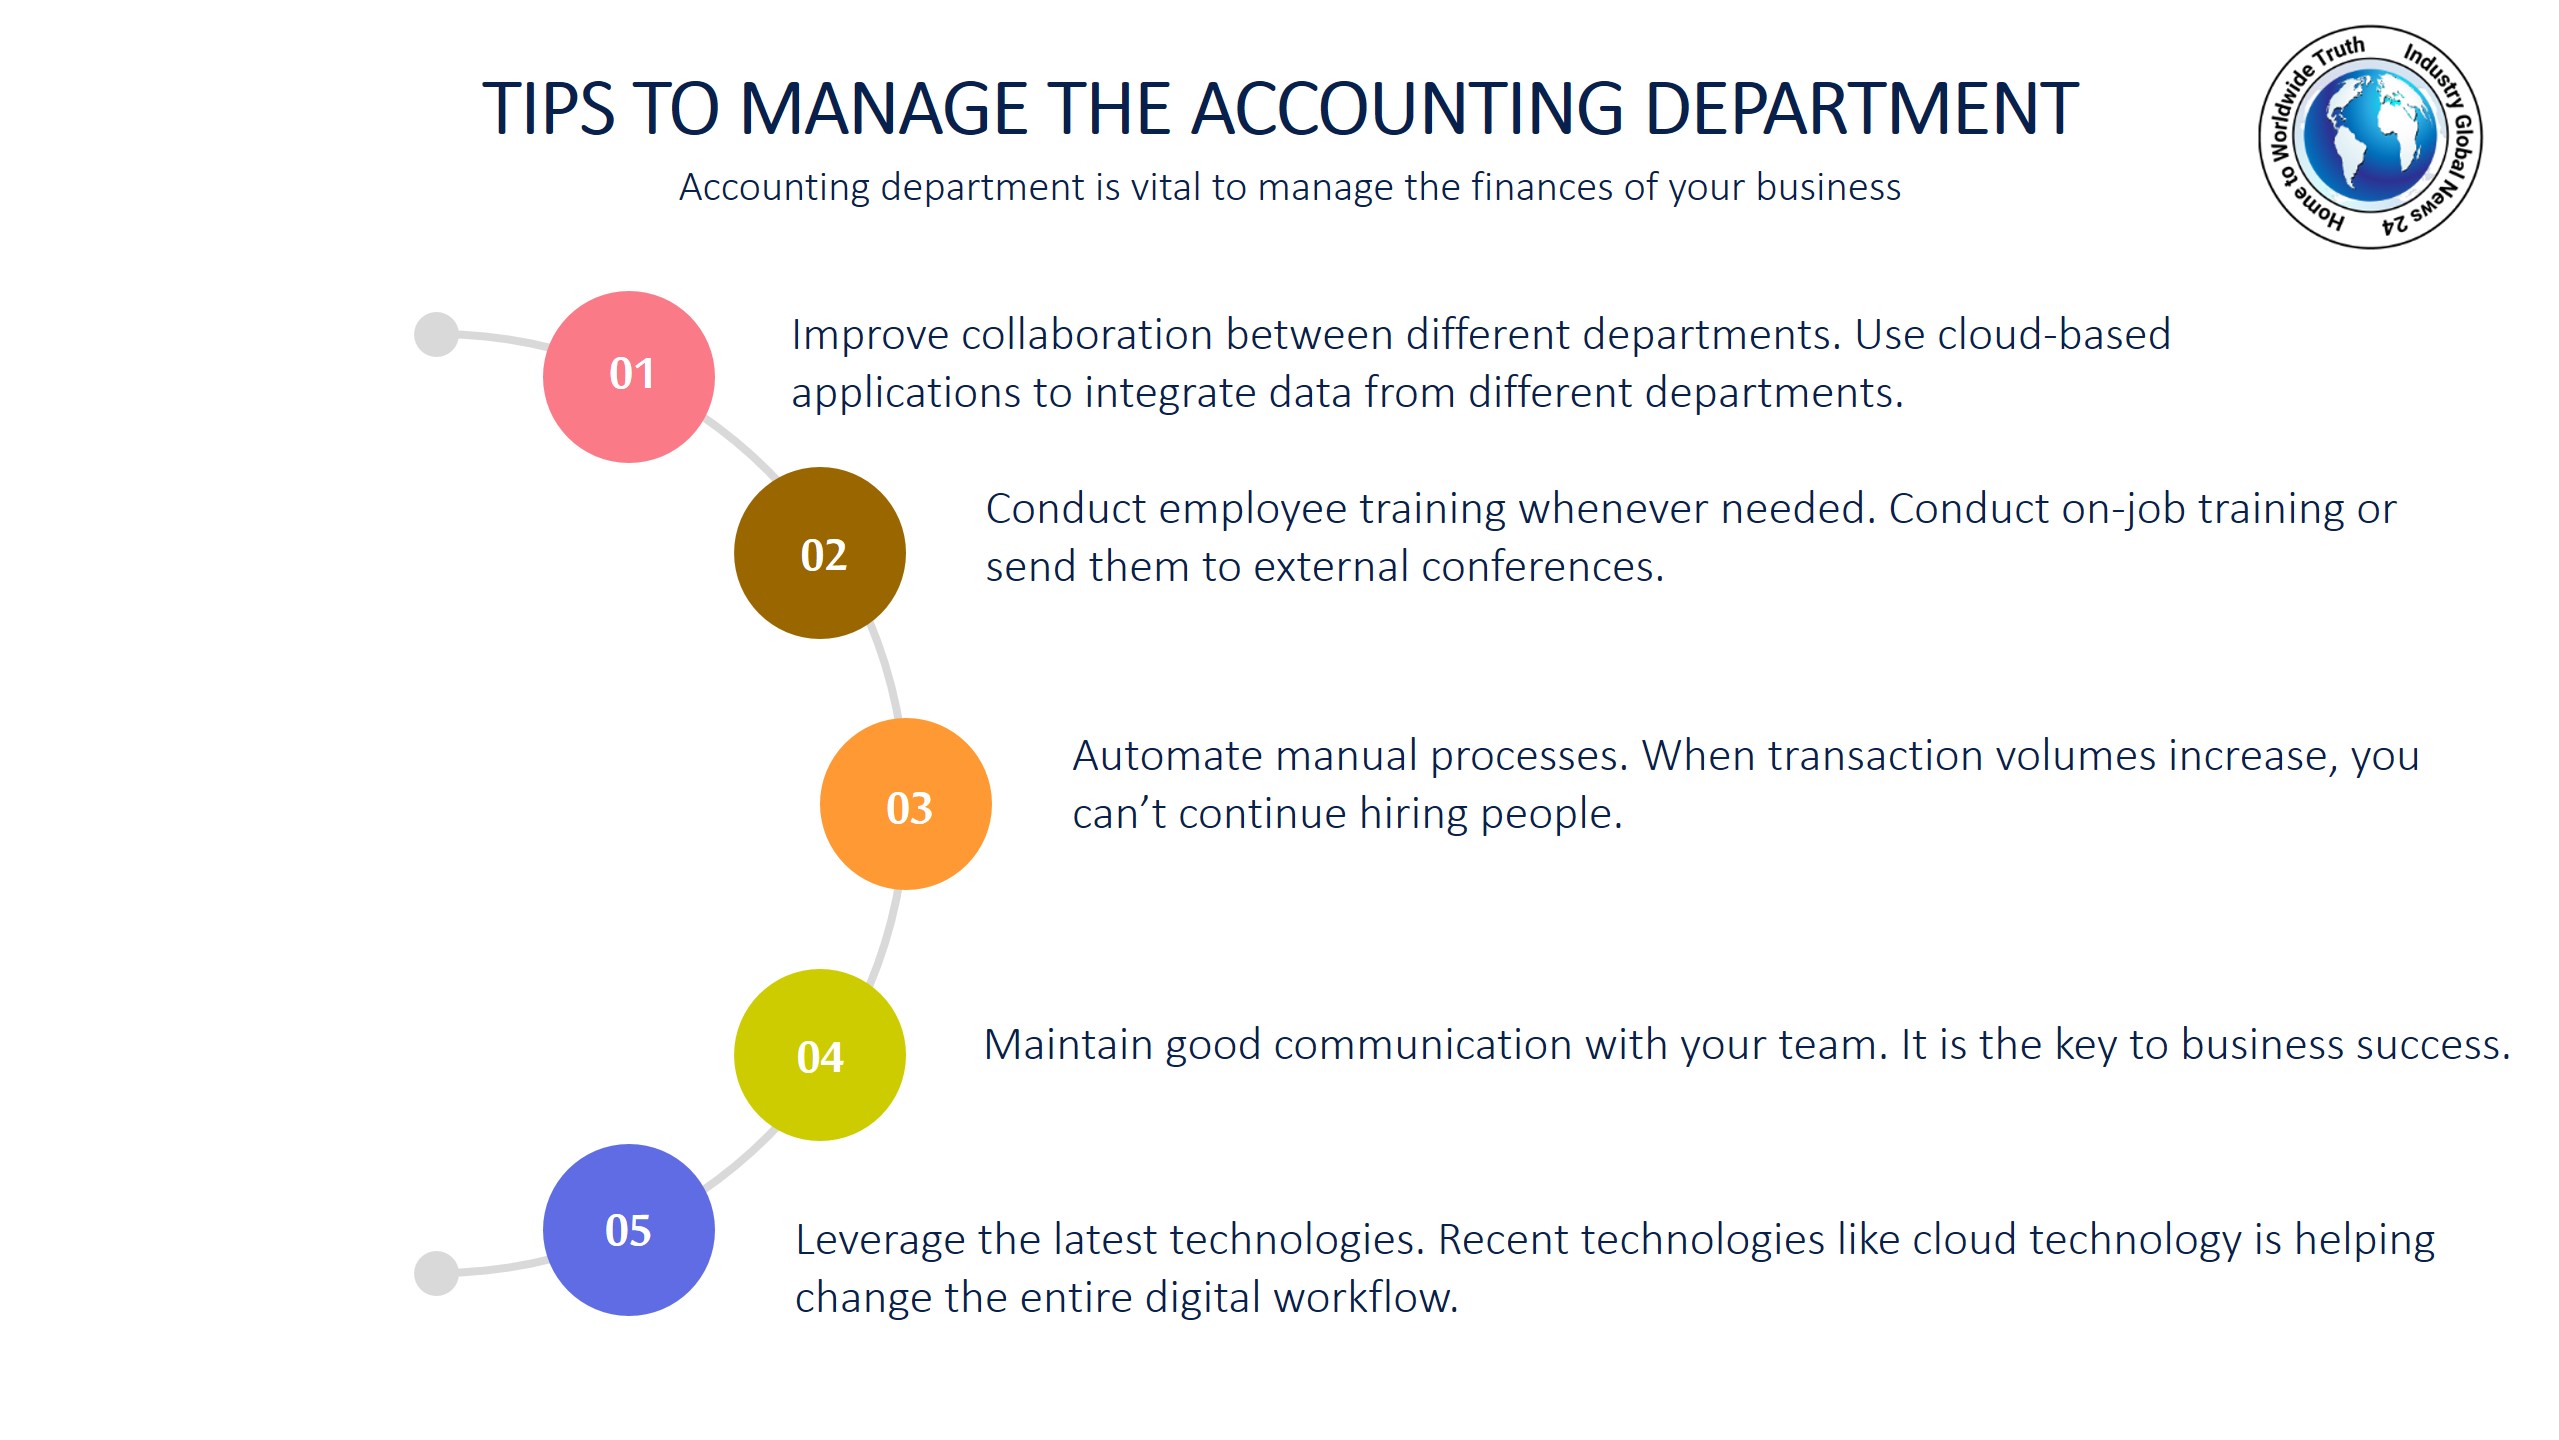 Tips to manage the accounting department